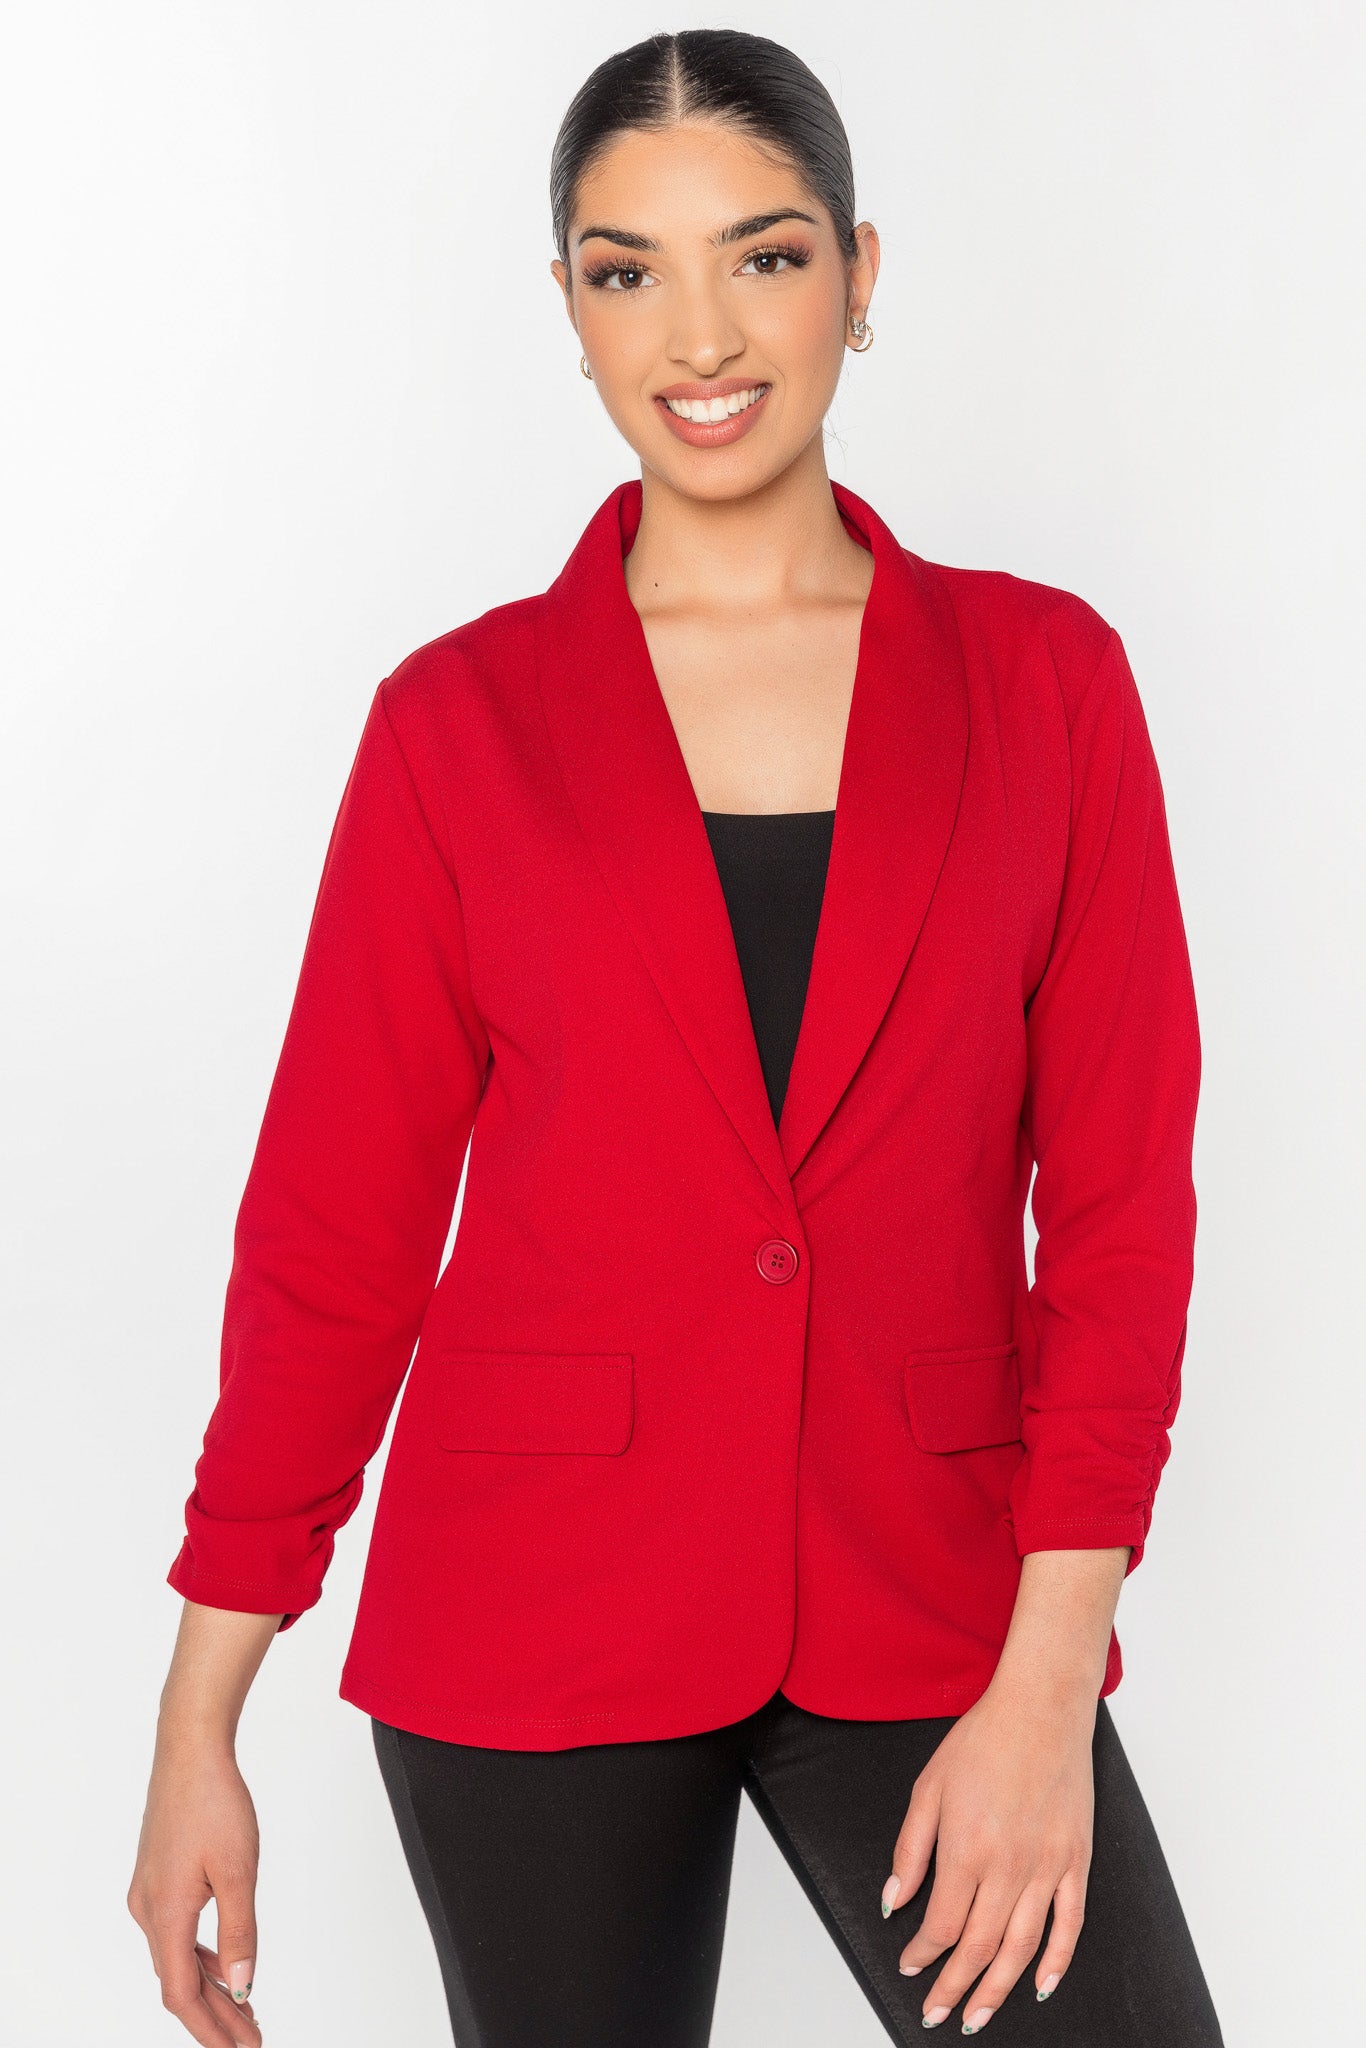 Scuba Crepe 3/4 Sleeve Fitted Blazer